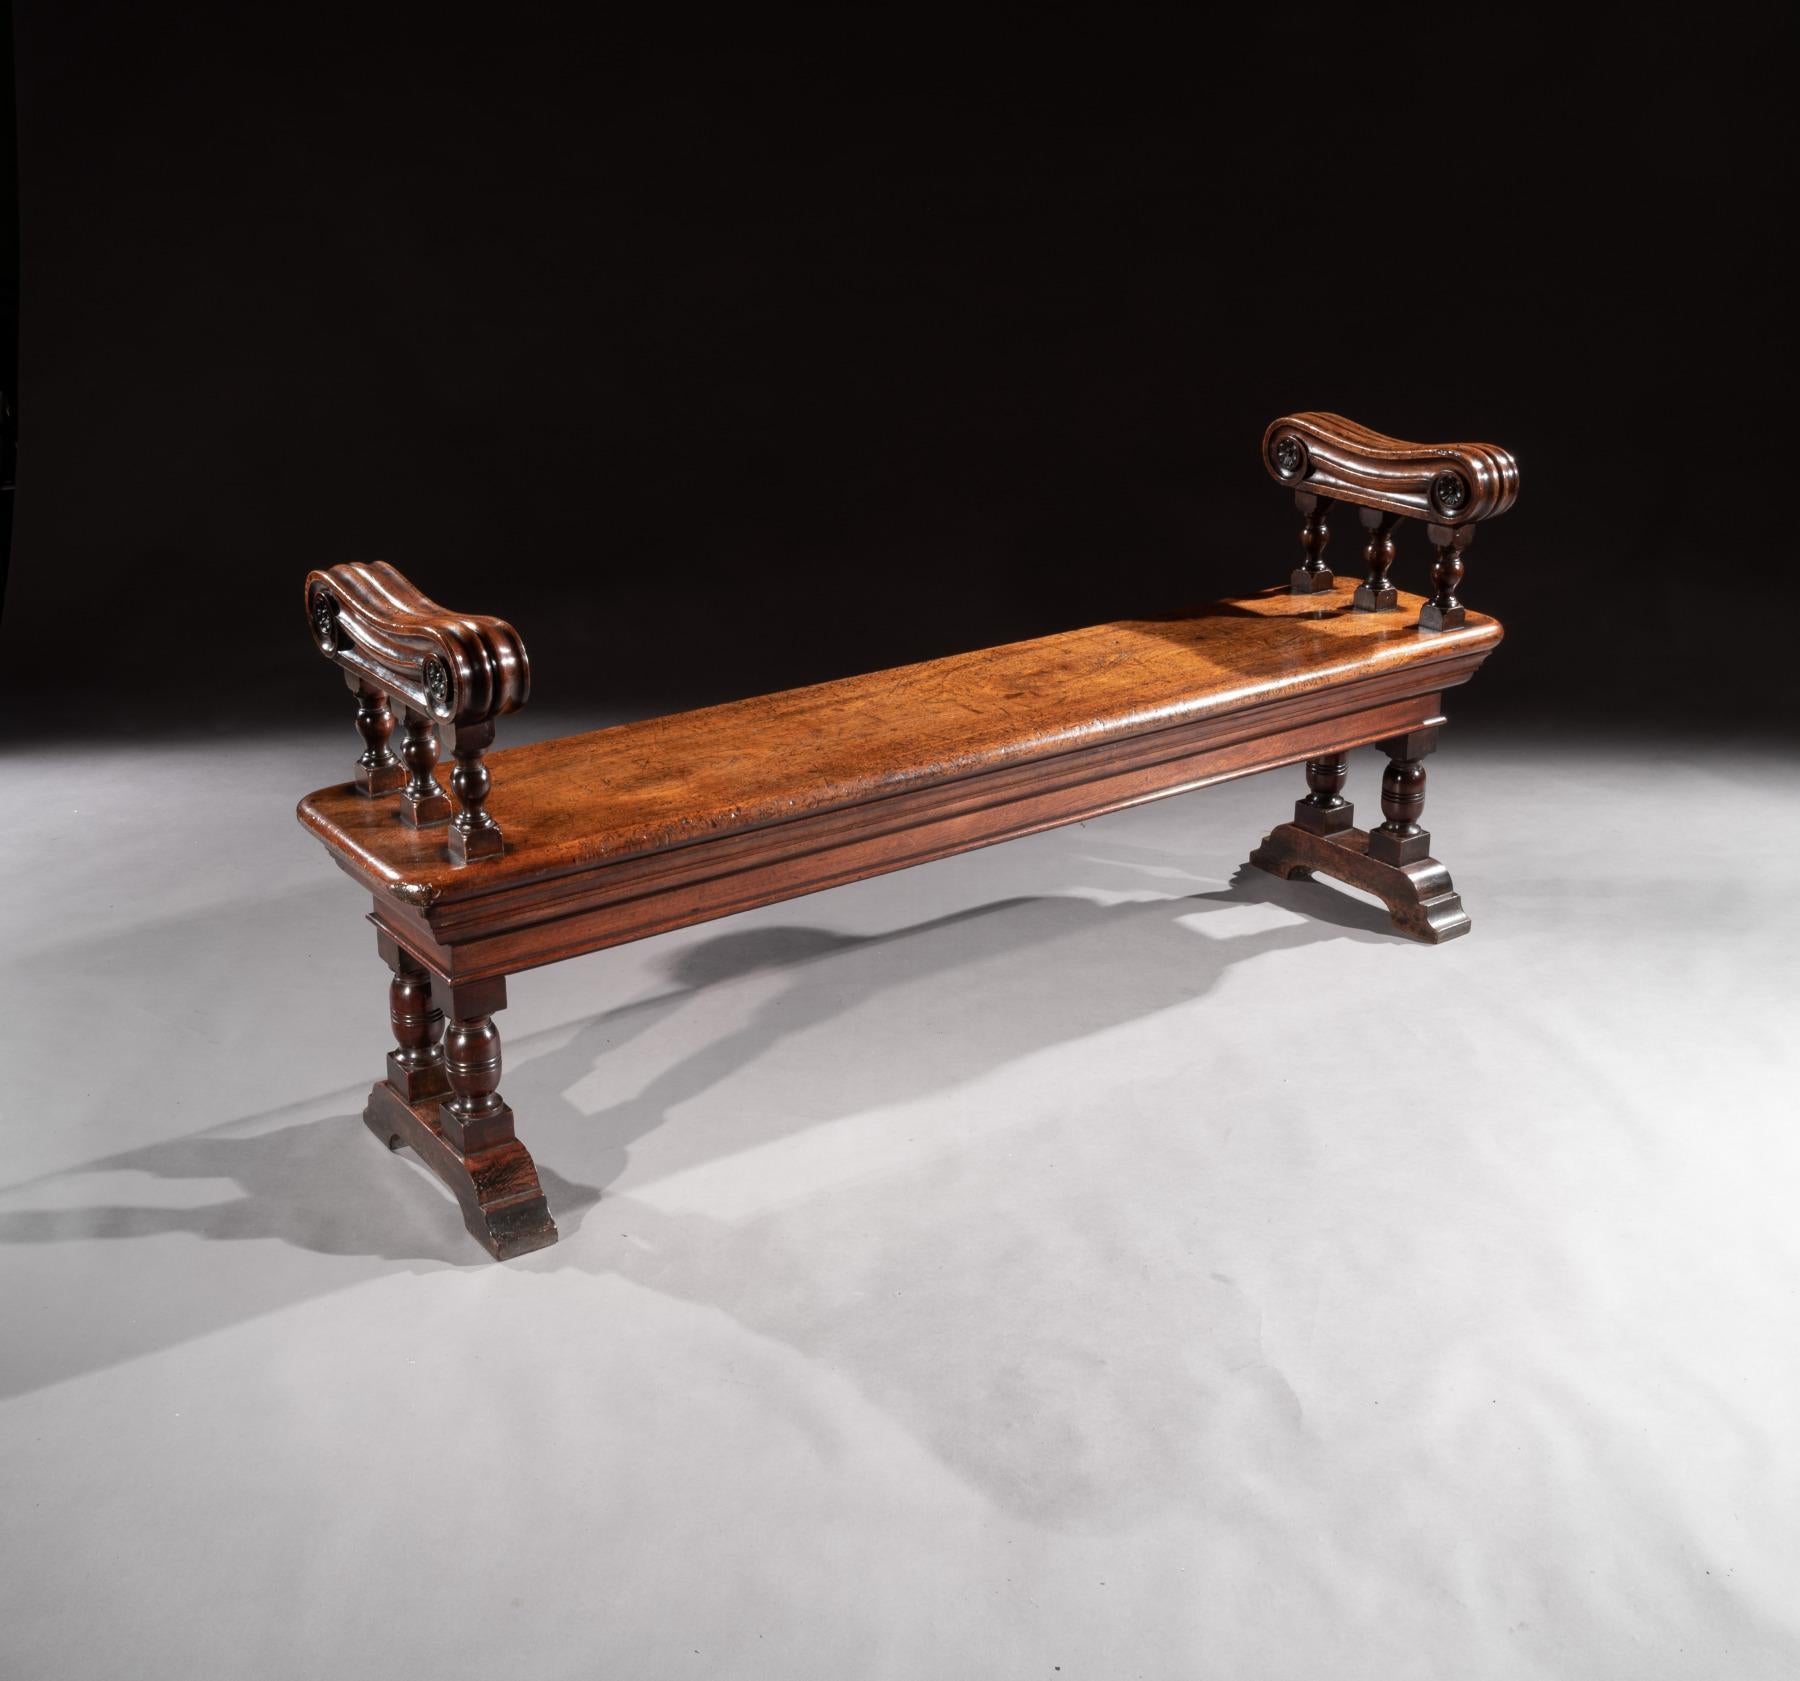 A wonderful mid-19th century country house walnut hall bench measuring 168cm long (65.5 inches) English circa 1850 an unusual model having beautiful oversized scrolled end supports with the original color and patination which is about as good as it